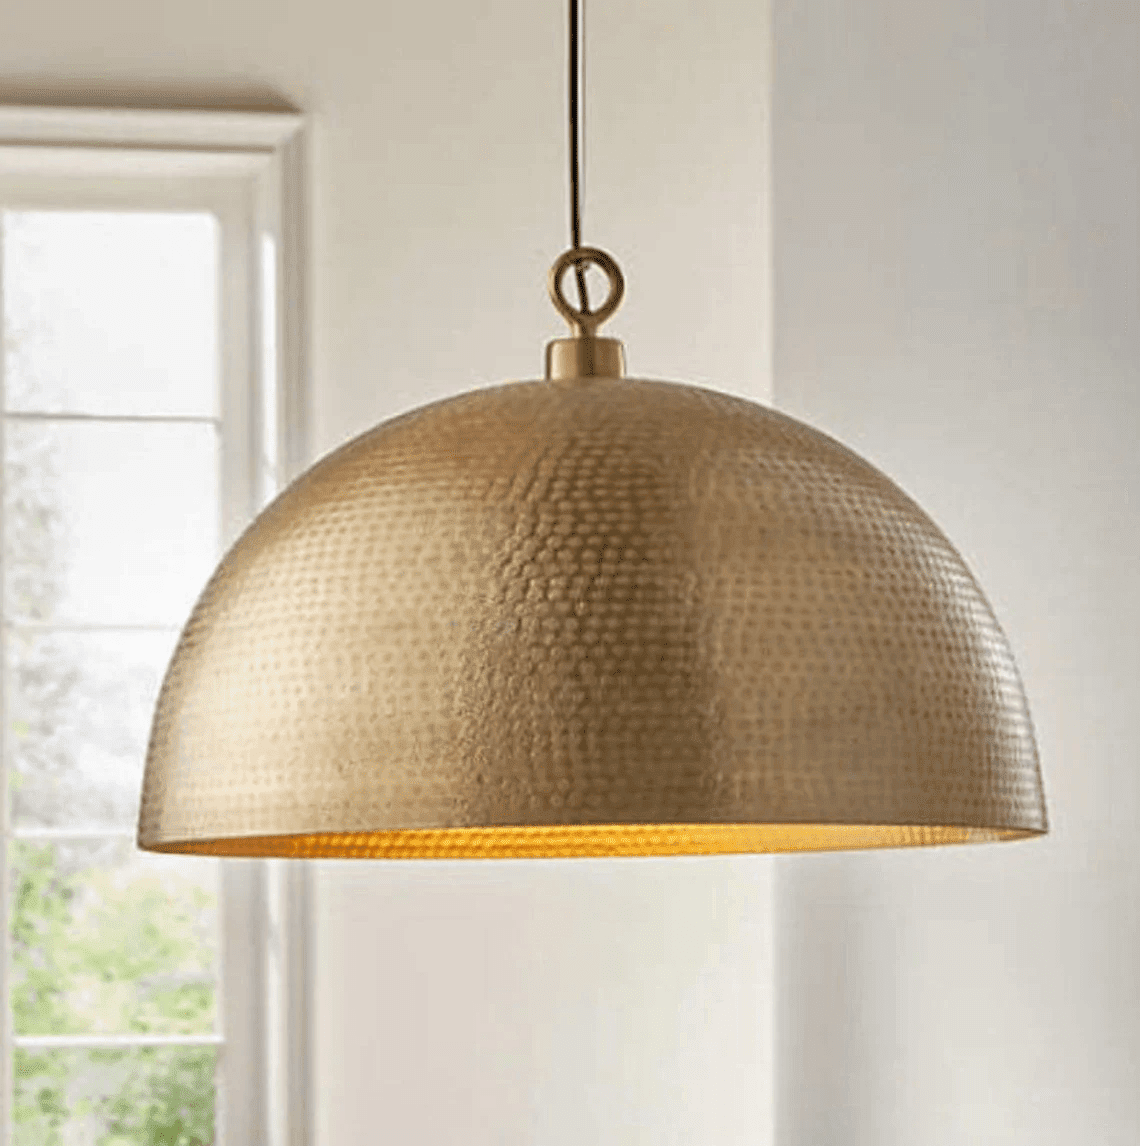 set of 2 Hammered Brass Dome Light Fixtures Moroccan Ceiling Lights - Ettilux Home